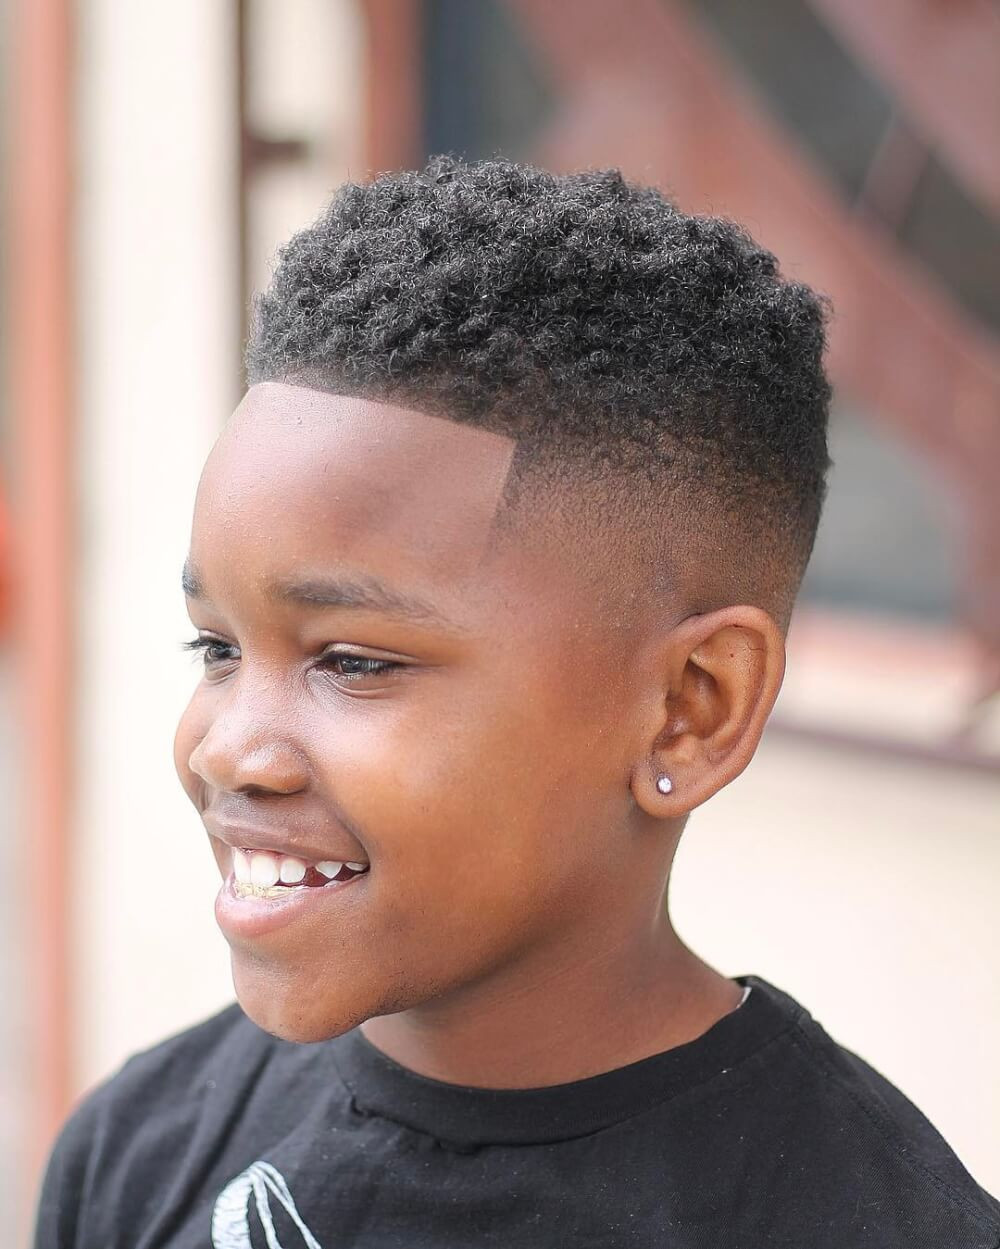 Little Black Boy Hairstyles
 28 Coolest Boys Haircuts for School in 2020